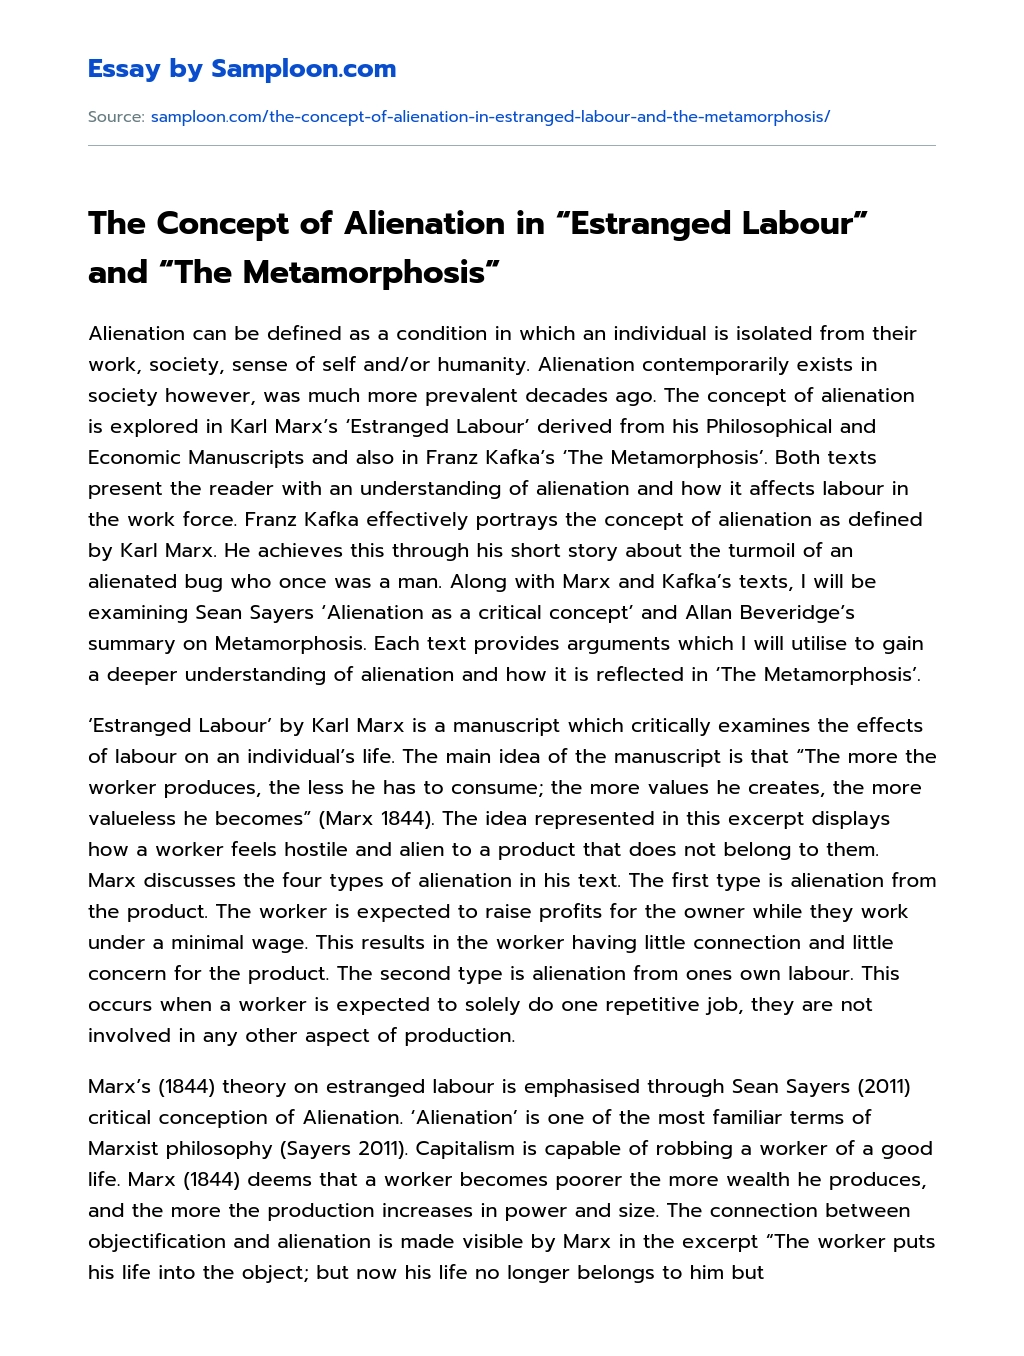 The Concept of Alienation in “Estranged Labour” and “The Metamorphosis” essay